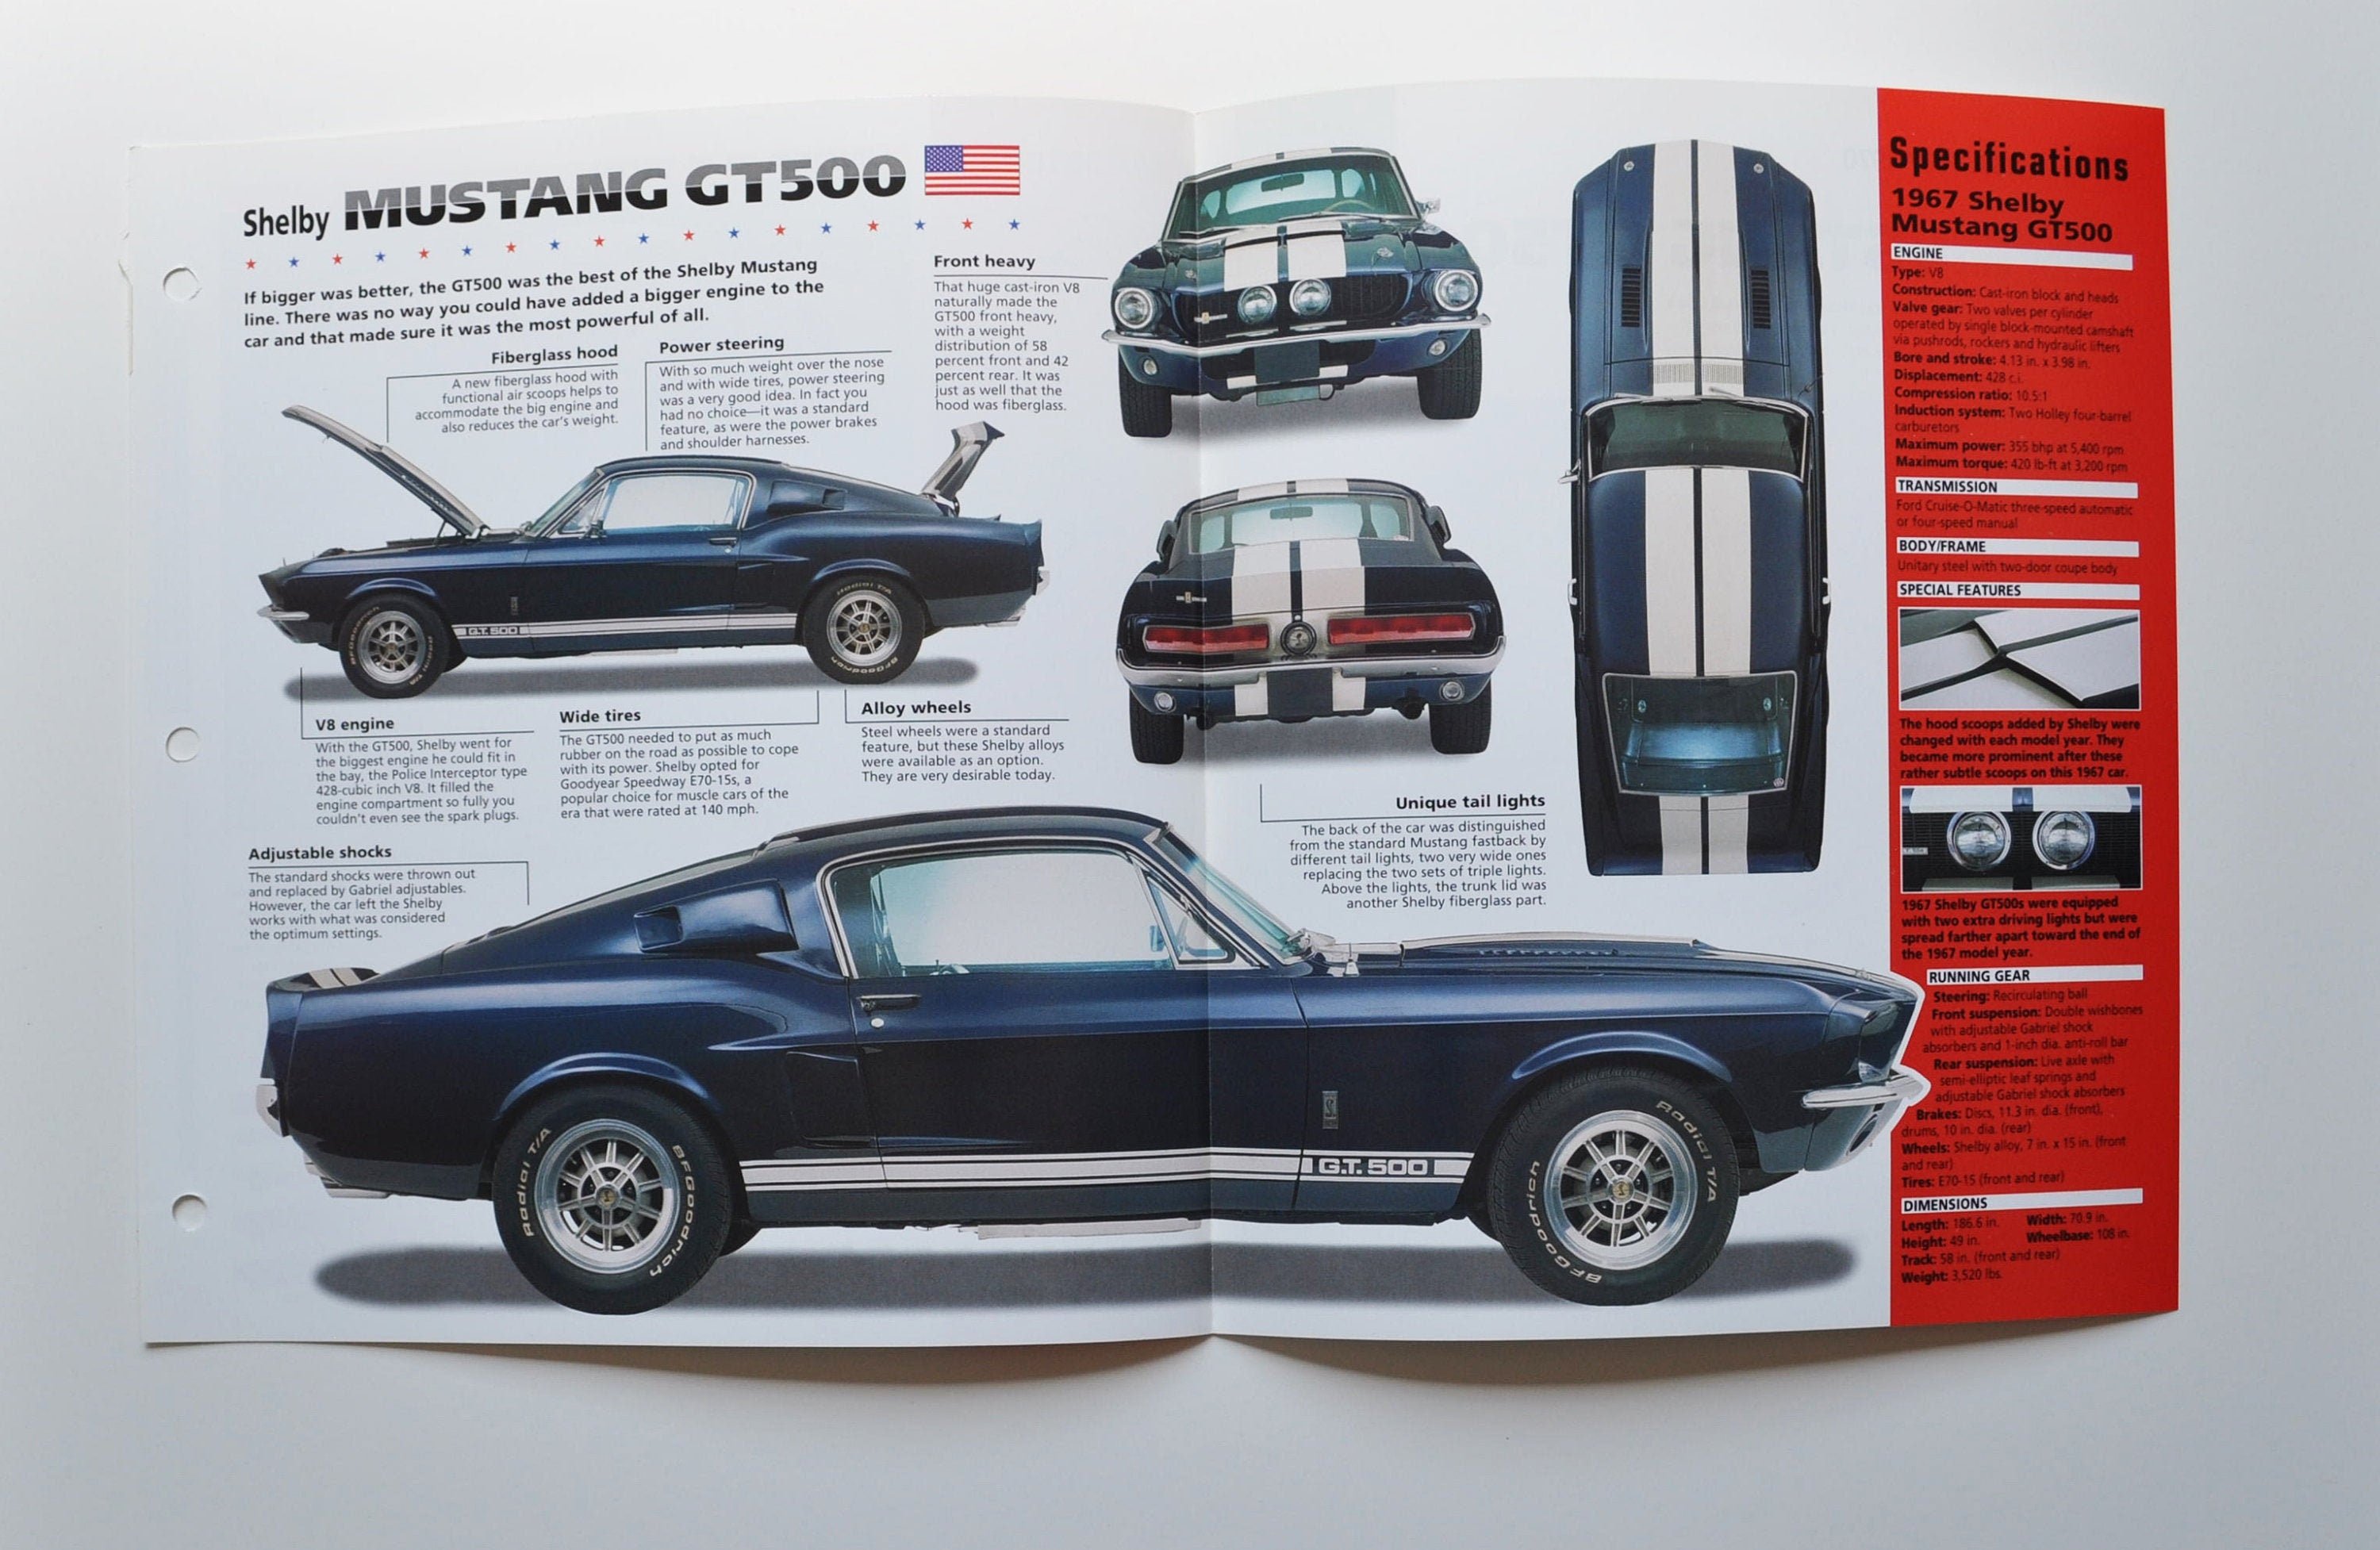 Ford Super Racing Car concept vintage shelby gt500 42"x24" Poster 159 Mustang 